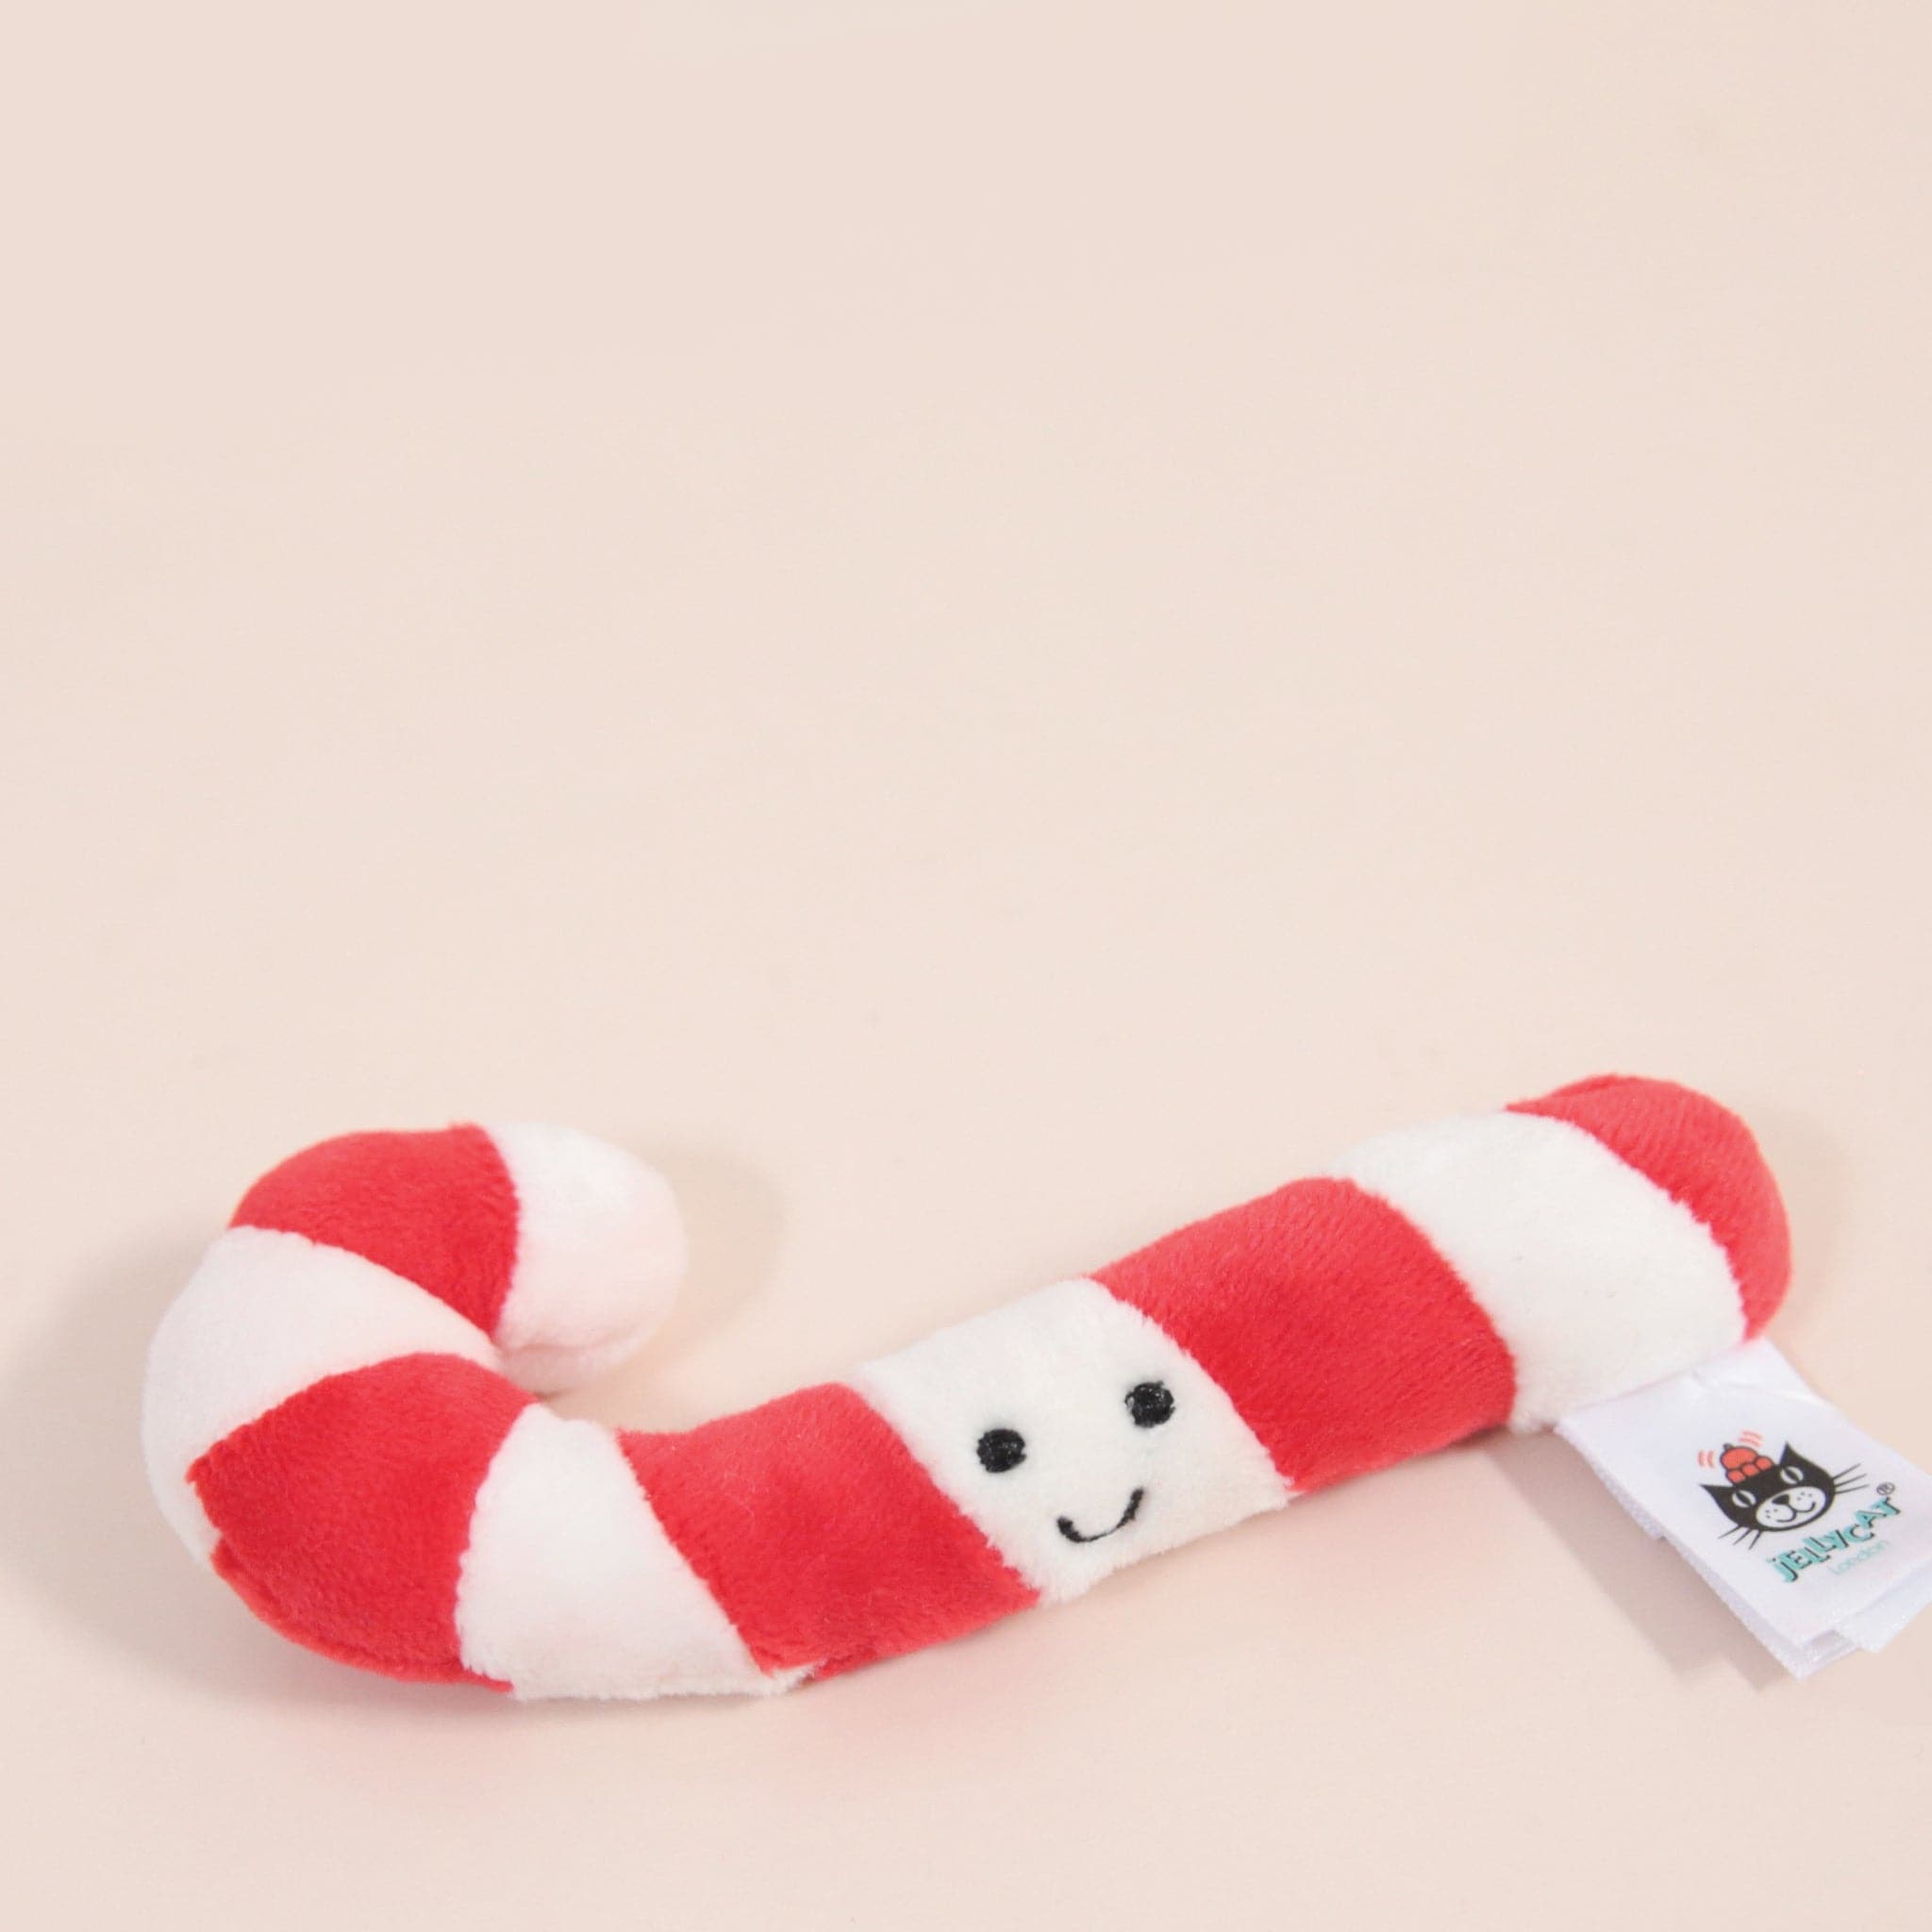 On a light pink background is a red and white candy cane stuffed toy with a smiling face in the center. 